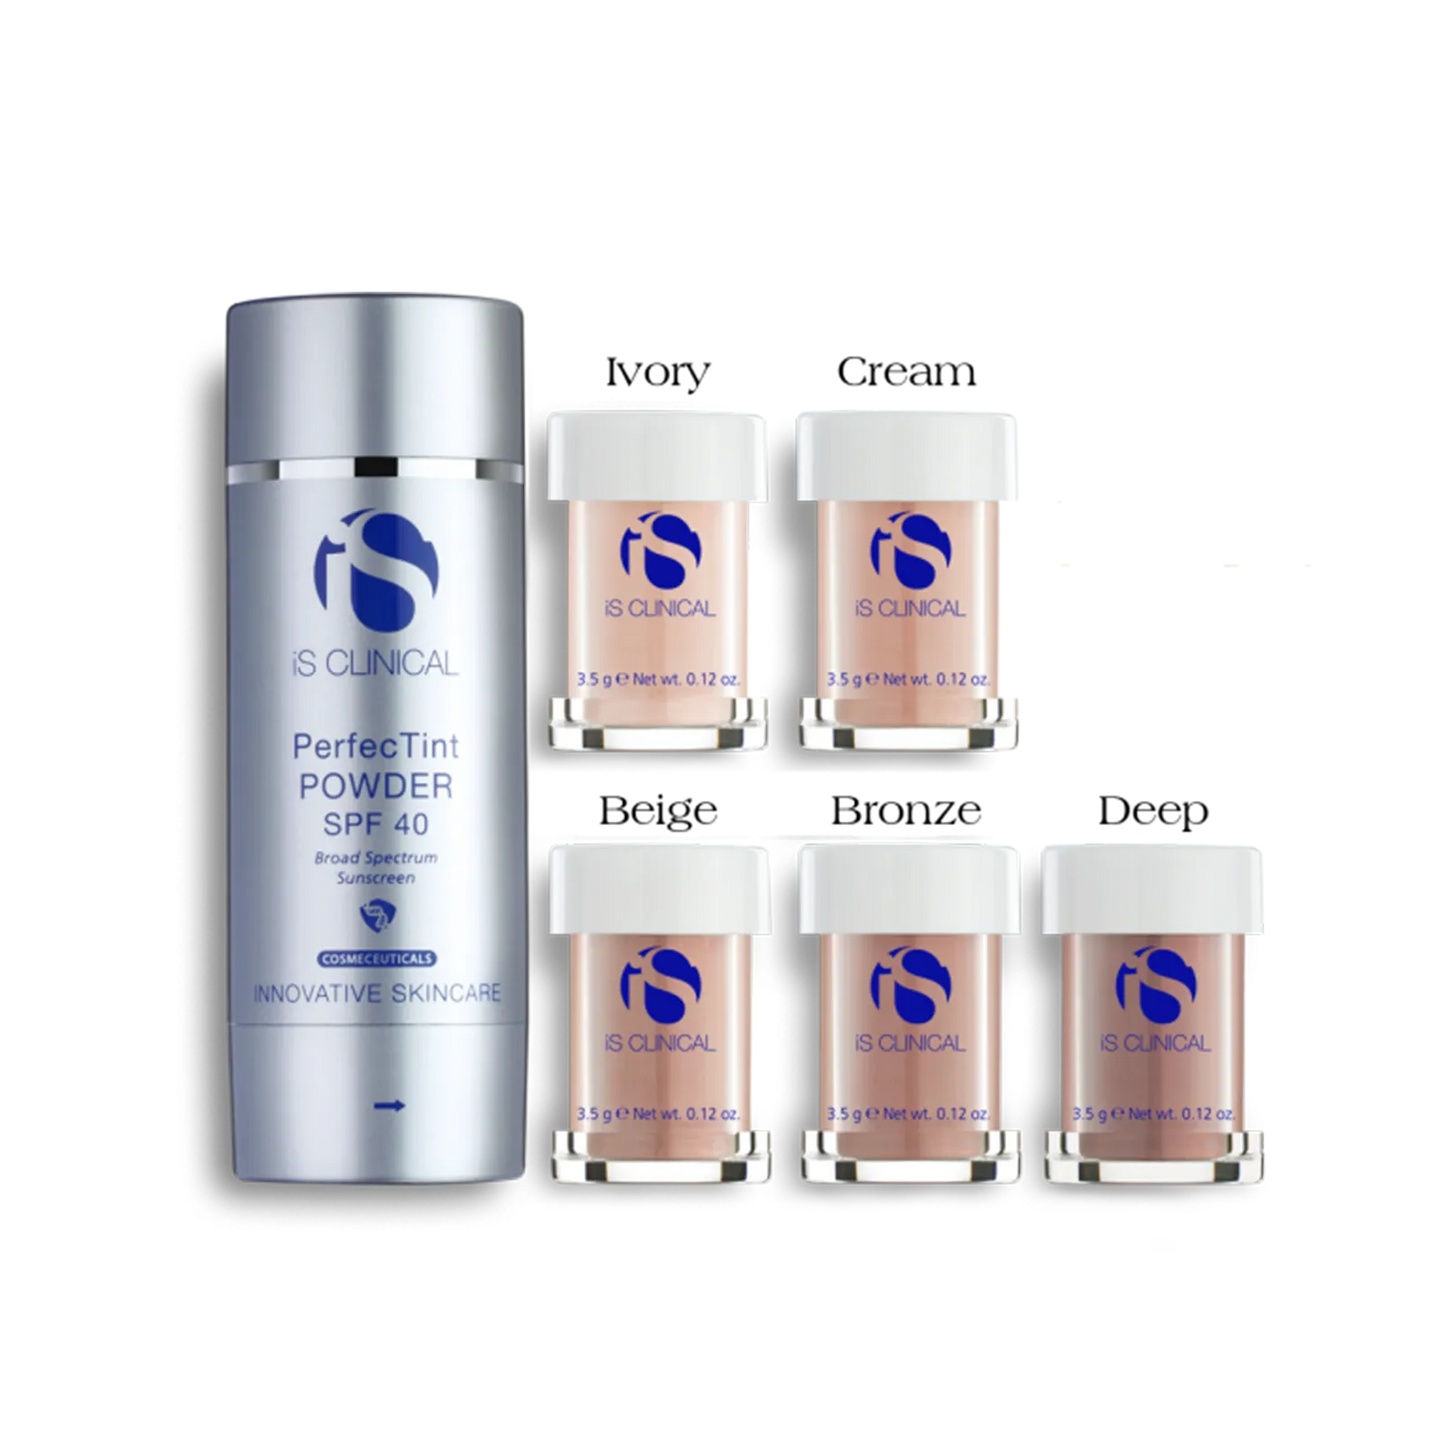 iS Clinical: PERFECTINT POWDER SPF 40